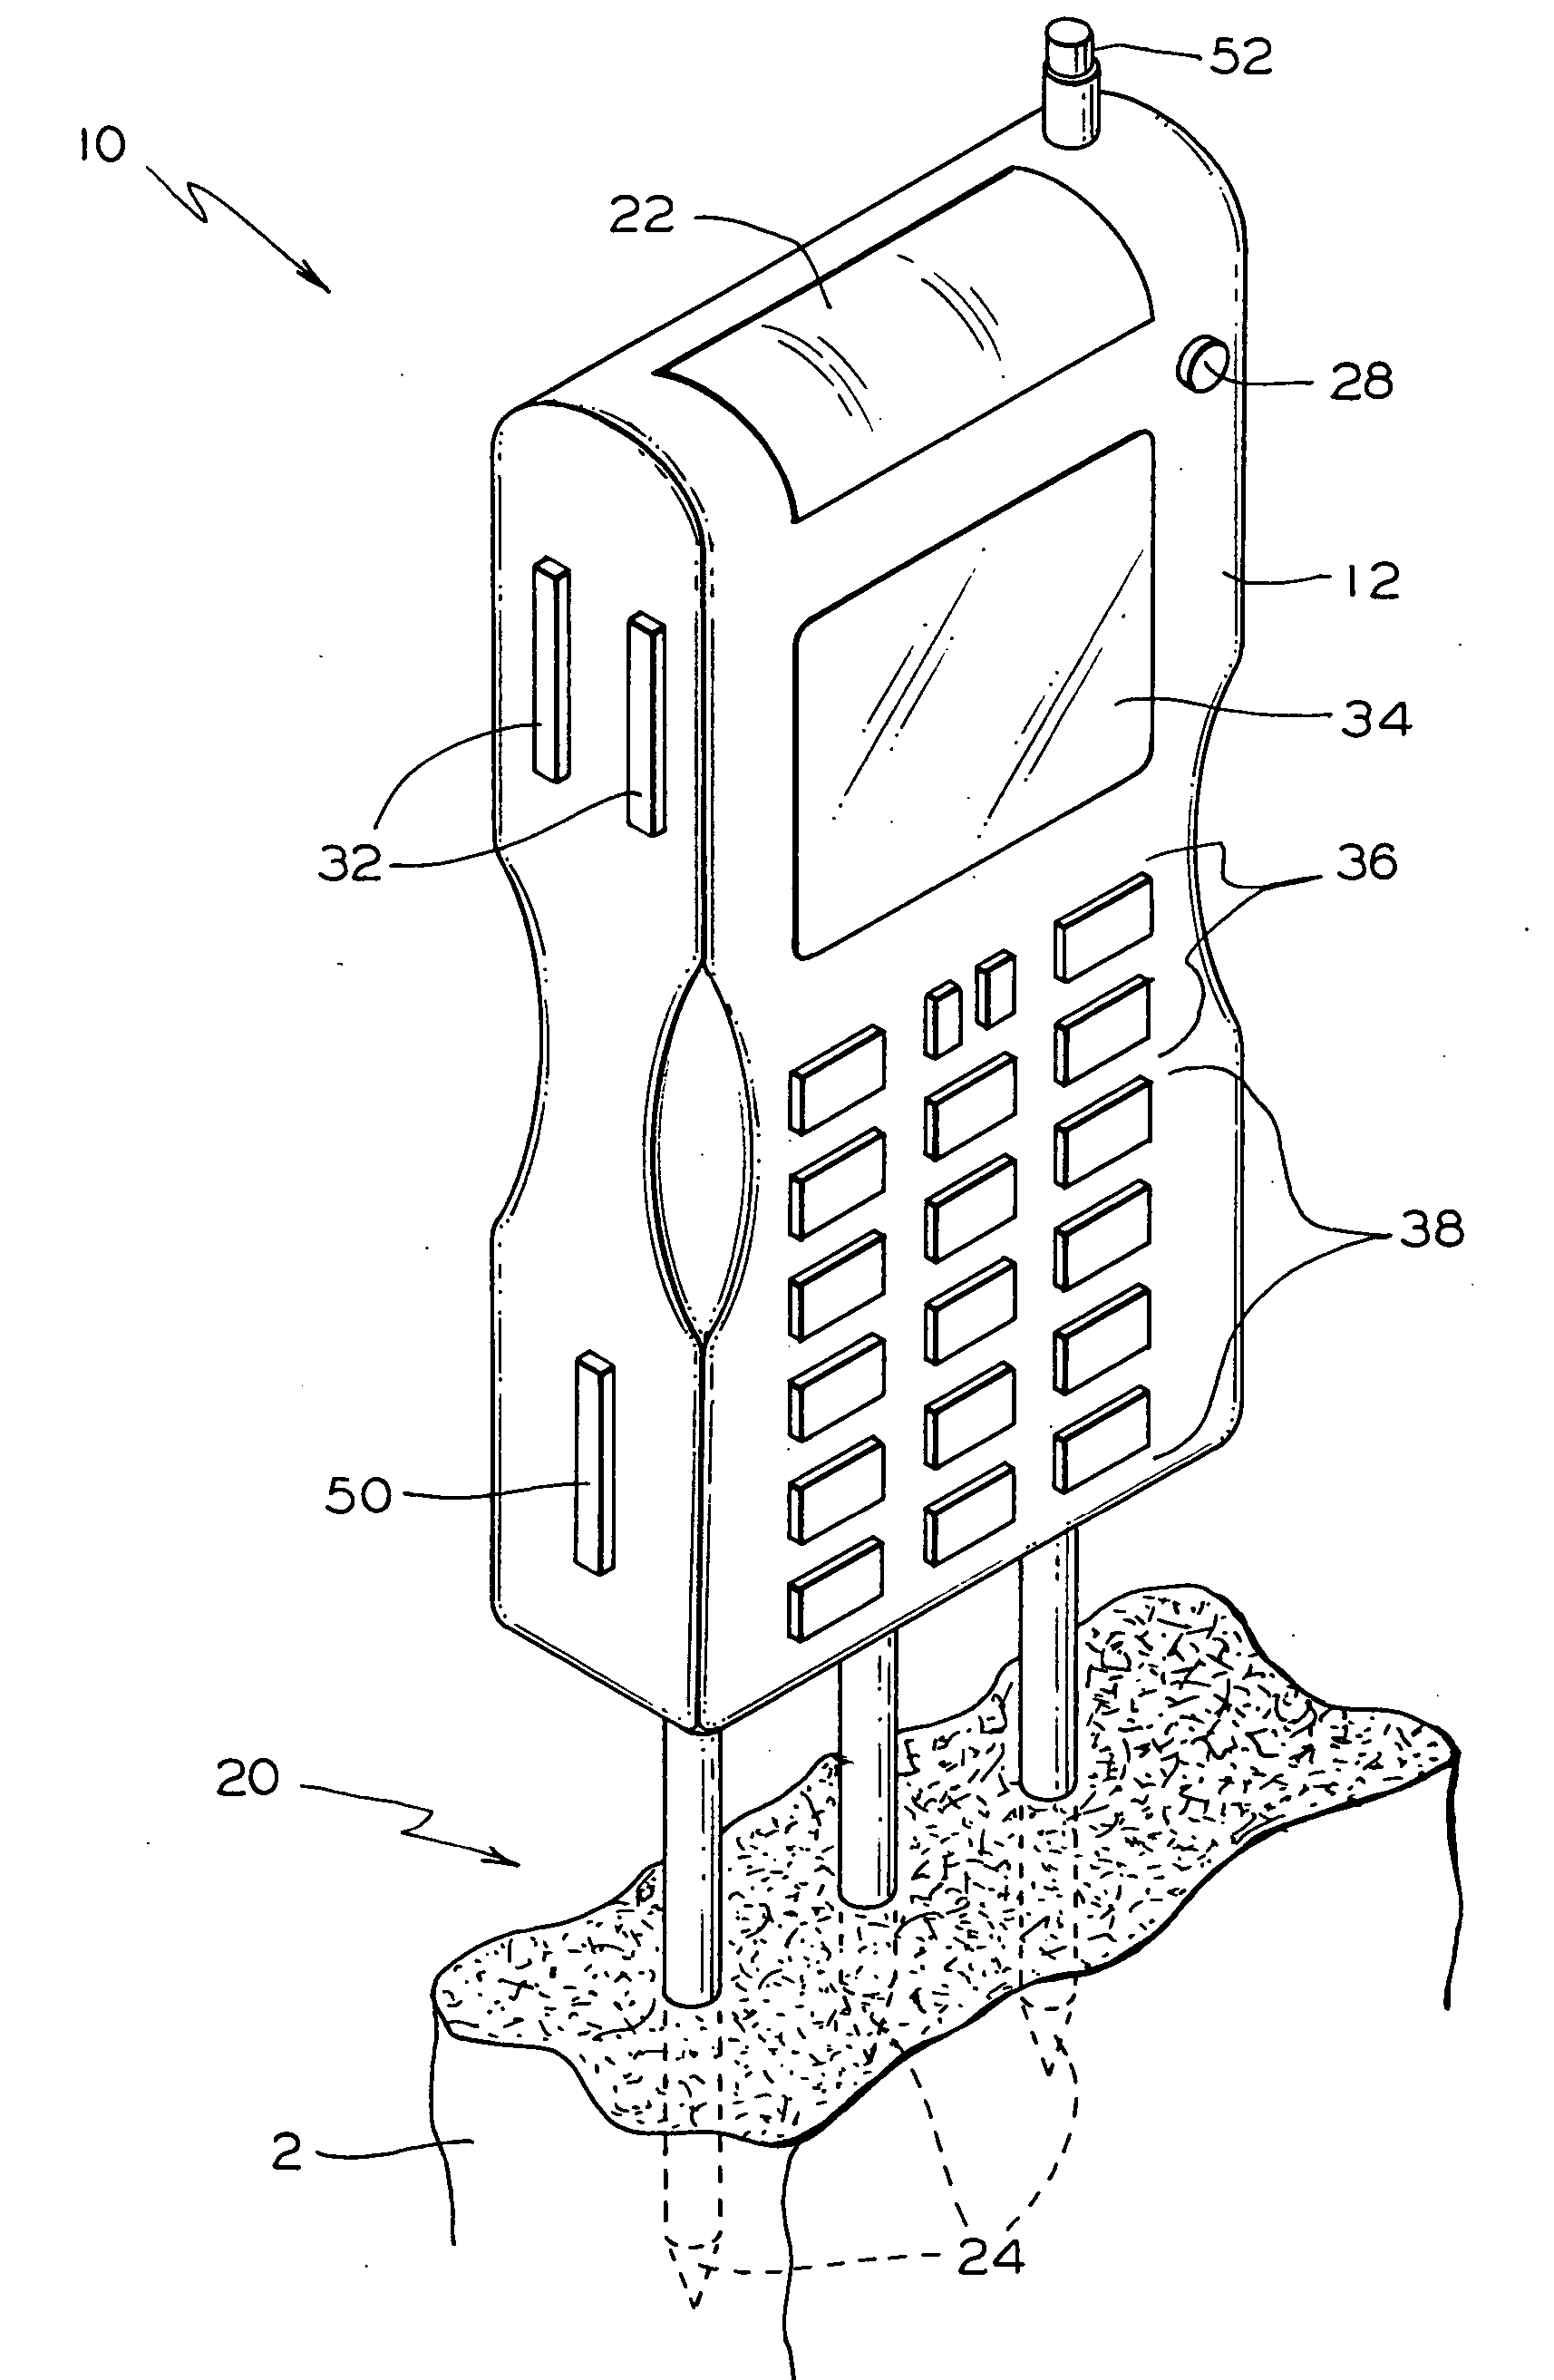 Apparatus and method for selecting and growing living plants